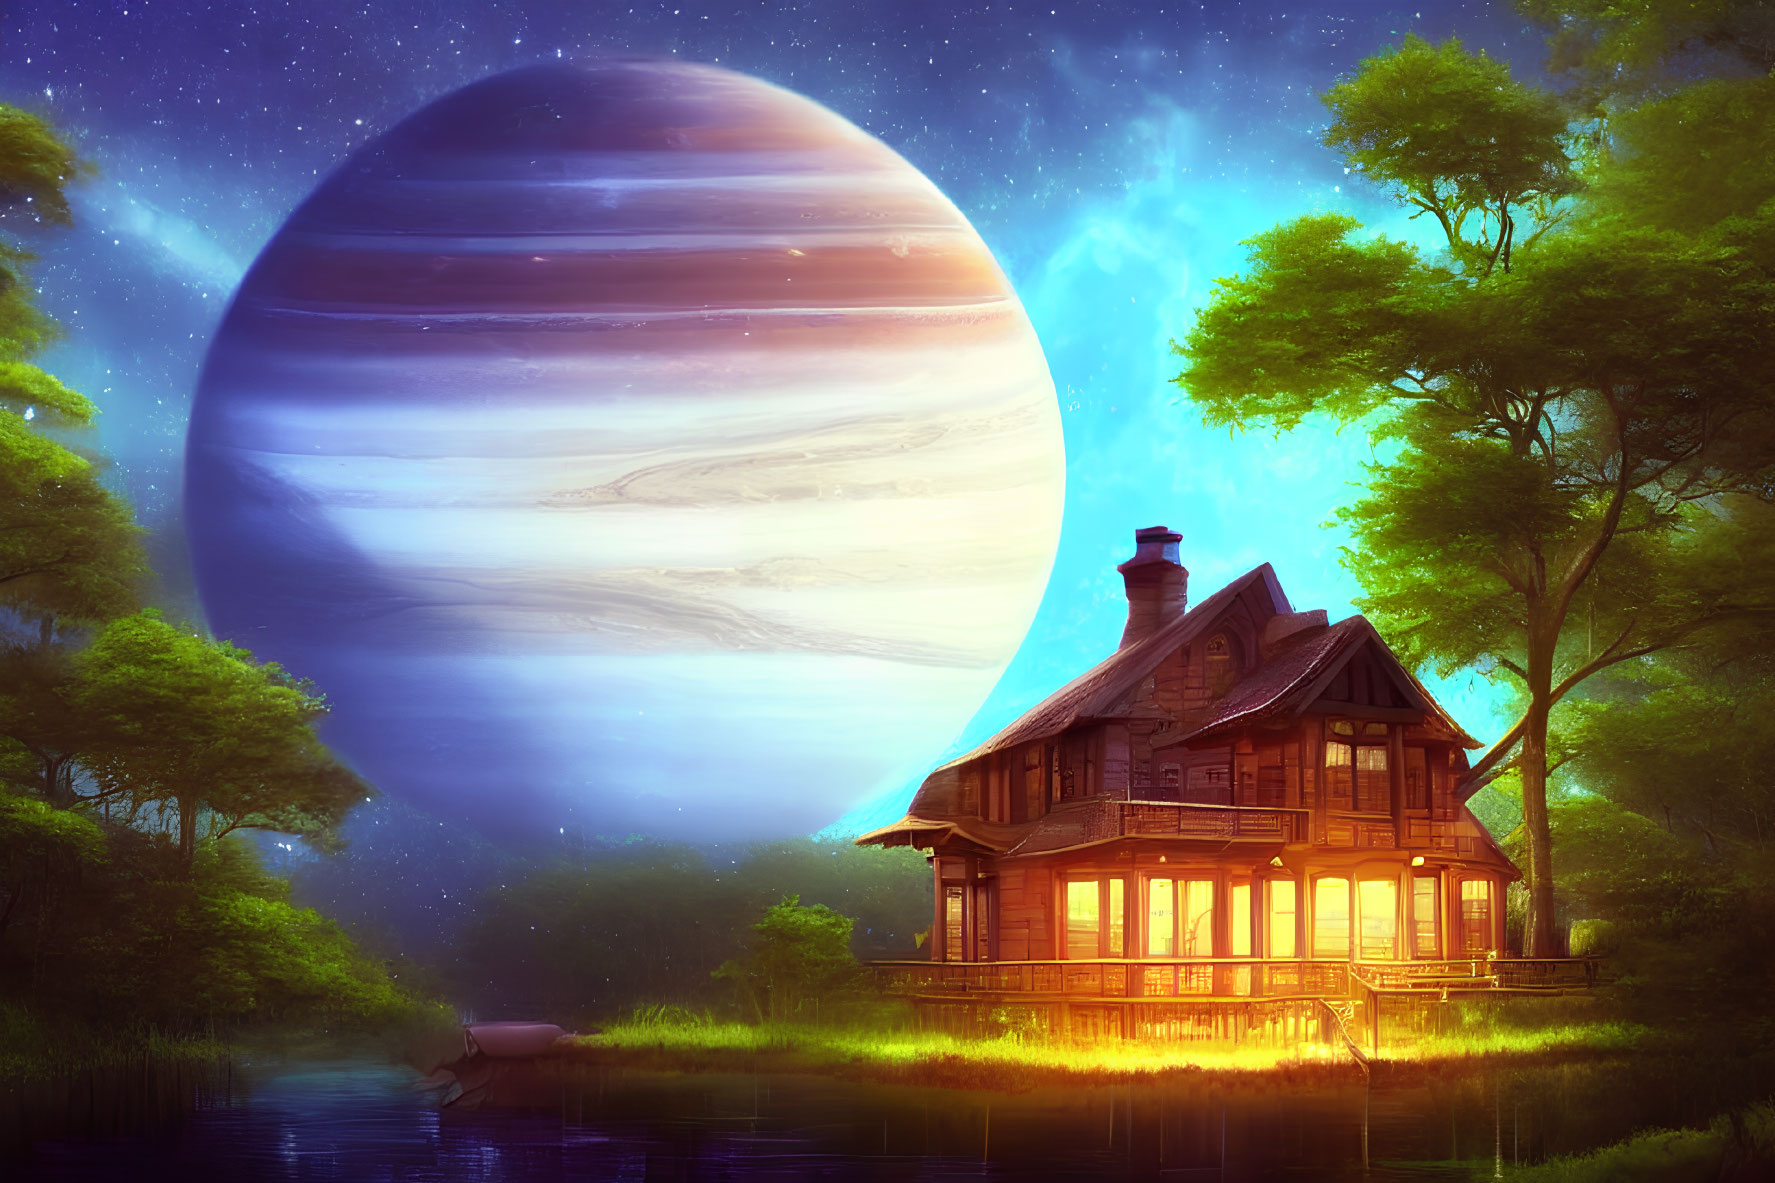 Cozy wooden house by a lake with giant planet and starlit sky